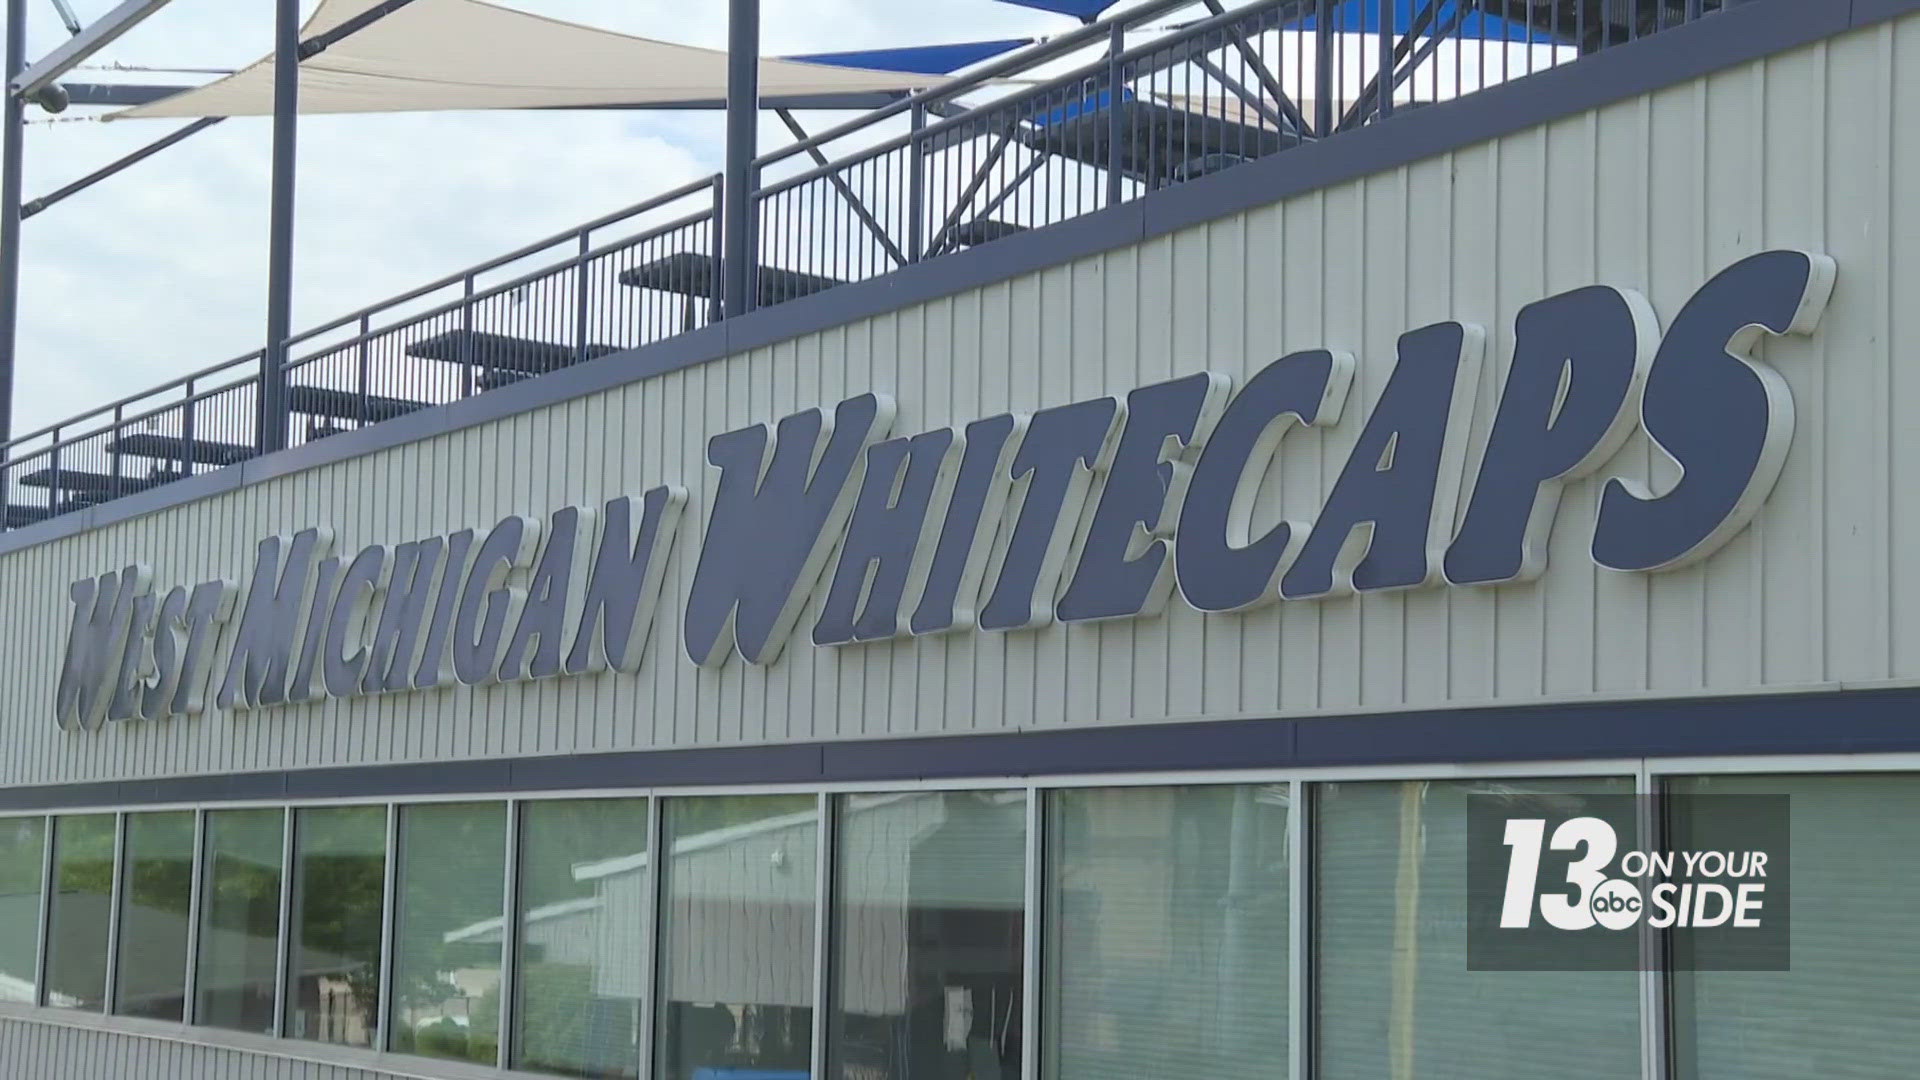 The West Michigan Whitecaps are well into the baseball season and things at LMCU Ballpark are humming!